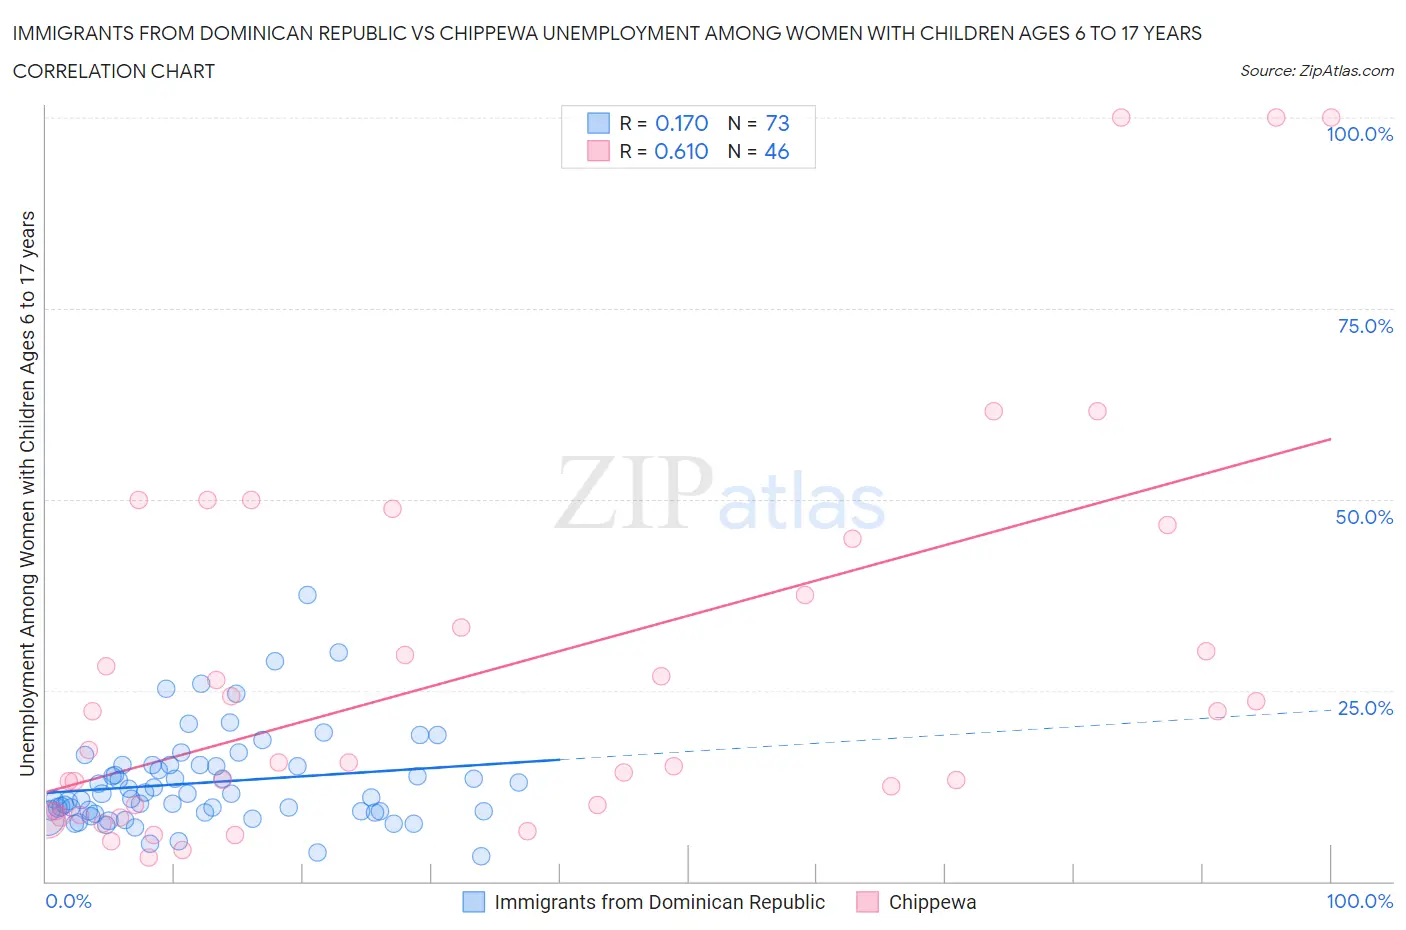 Immigrants from Dominican Republic vs Chippewa Unemployment Among Women with Children Ages 6 to 17 years